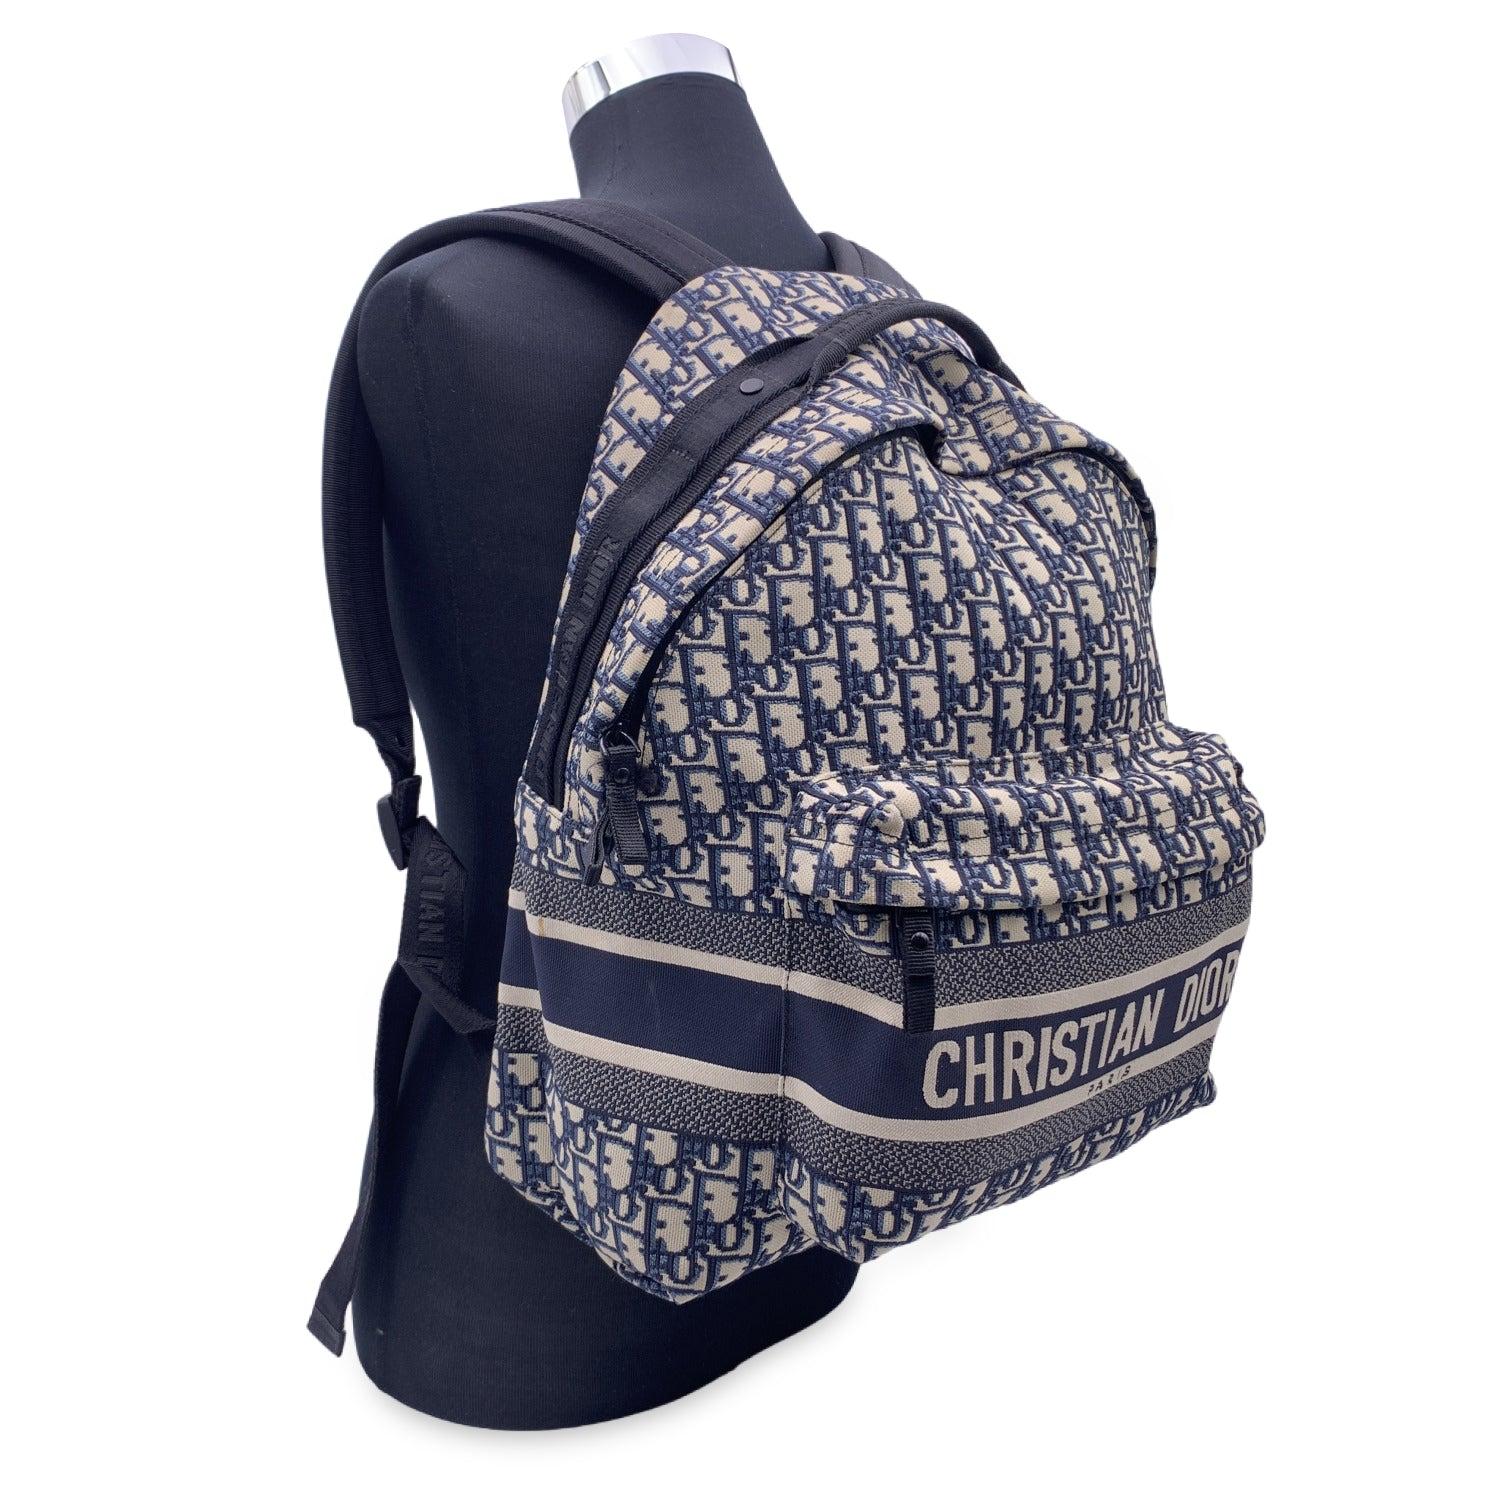 This beautiful Bag will come with a Certificate of Authenticity provided by Entrupy. The certificate will be provided at no further cost Beautiful DiorTravel backpack crafted in blue waterproof Dior Oblique technical jacquard. 'CHRISTIAN DIOR PARIS'